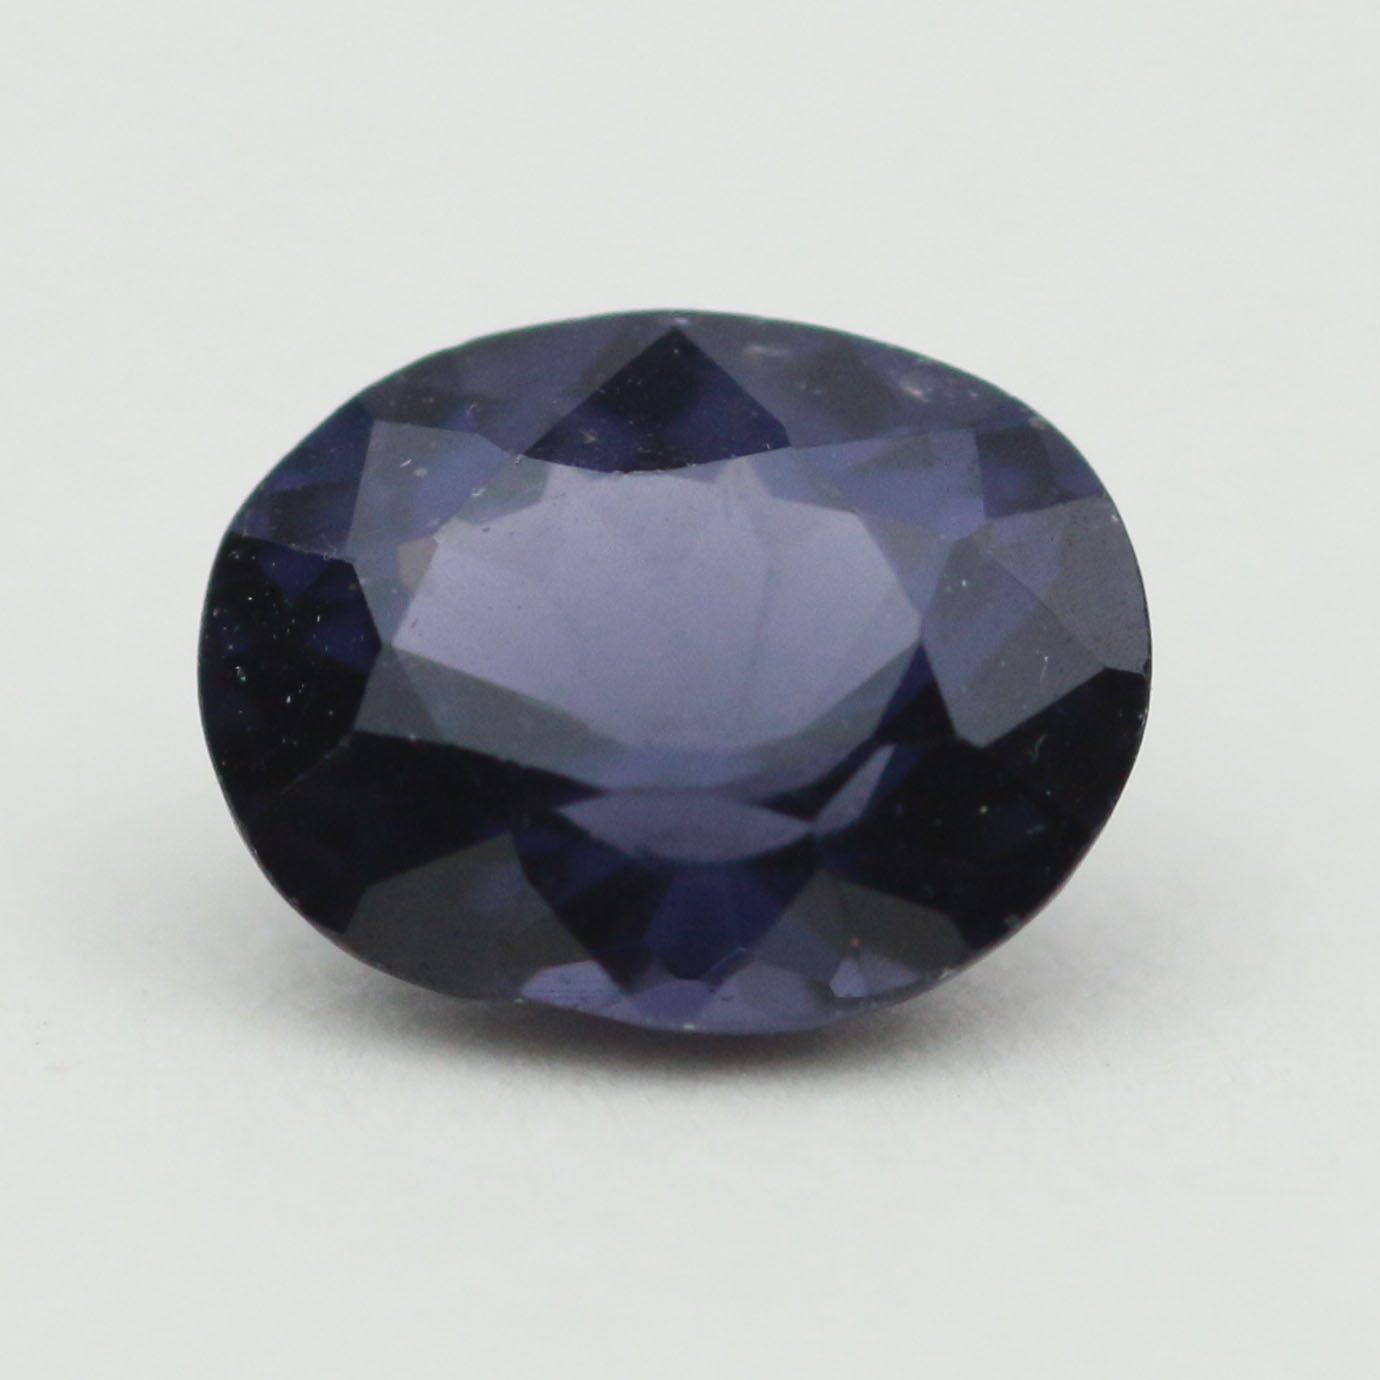 6.5X5.3 PURPLE SPINEL OVAL 0.81CT